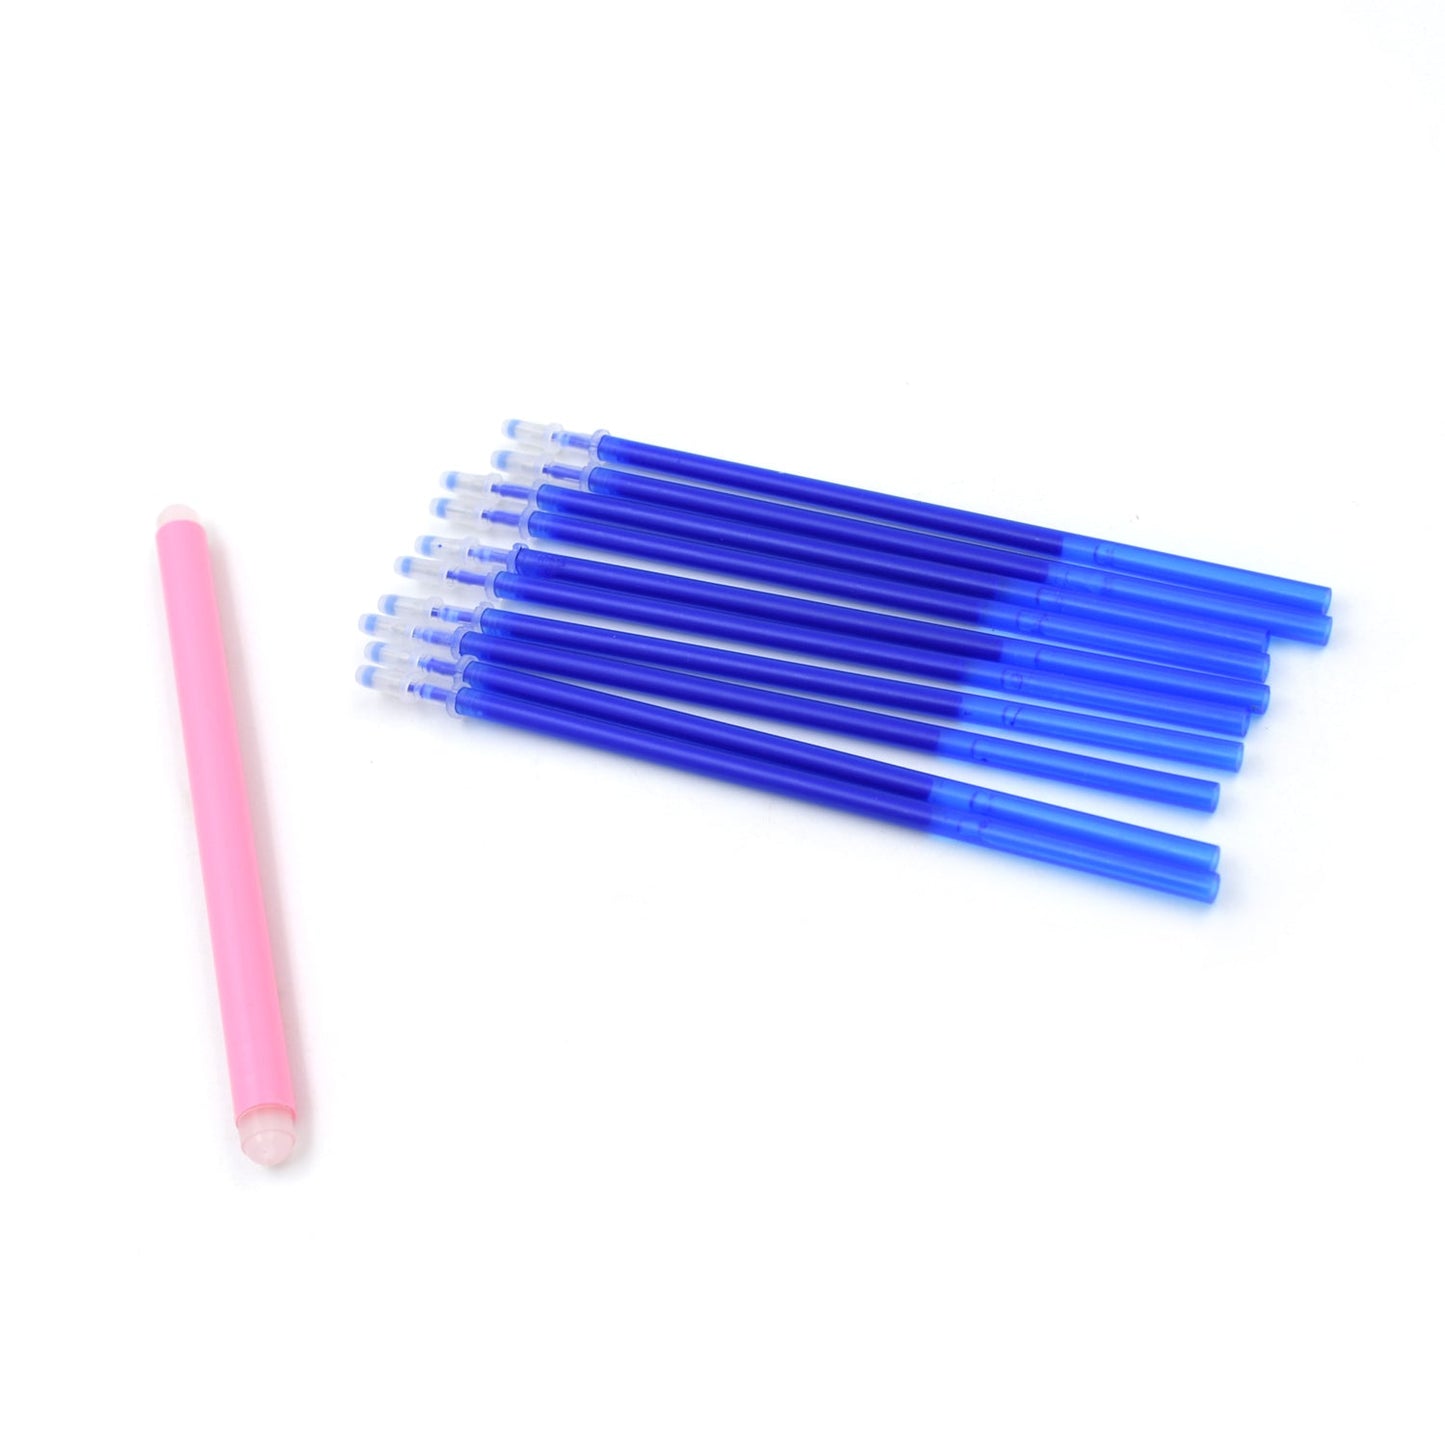 7796 School Office Erasable Fabric Marking Pens, Full Needle Refills Blue Gel Pen Refill Replacement, for School Pen Writing Tools Kawaii Stationery (11 Pc Set)